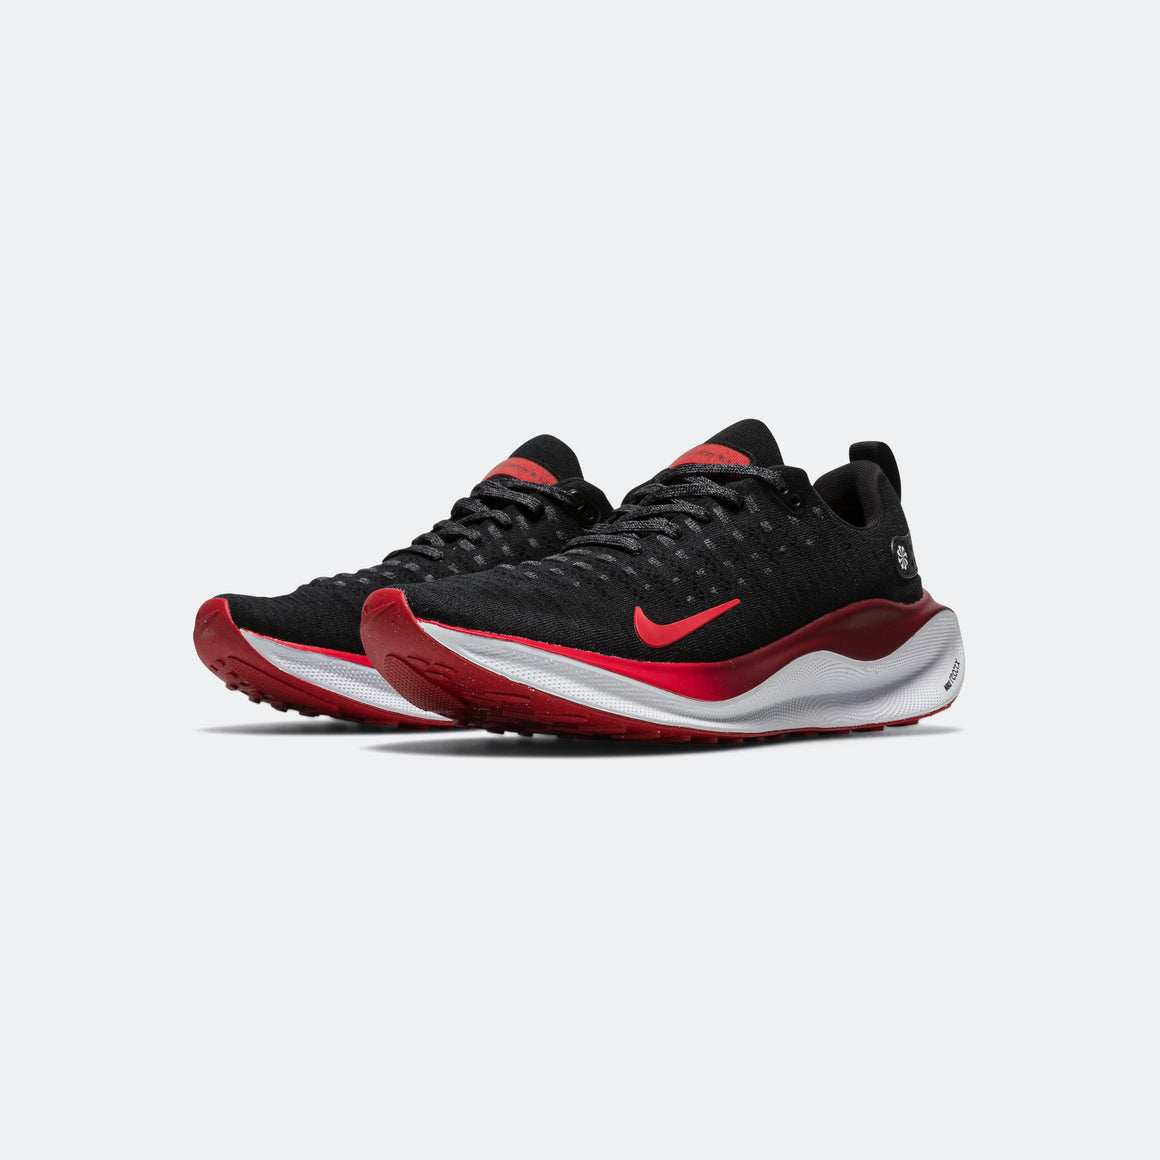 Nike - Mens ReactX Infinity Run 4 - Black/Fire Red - Up There Athletics